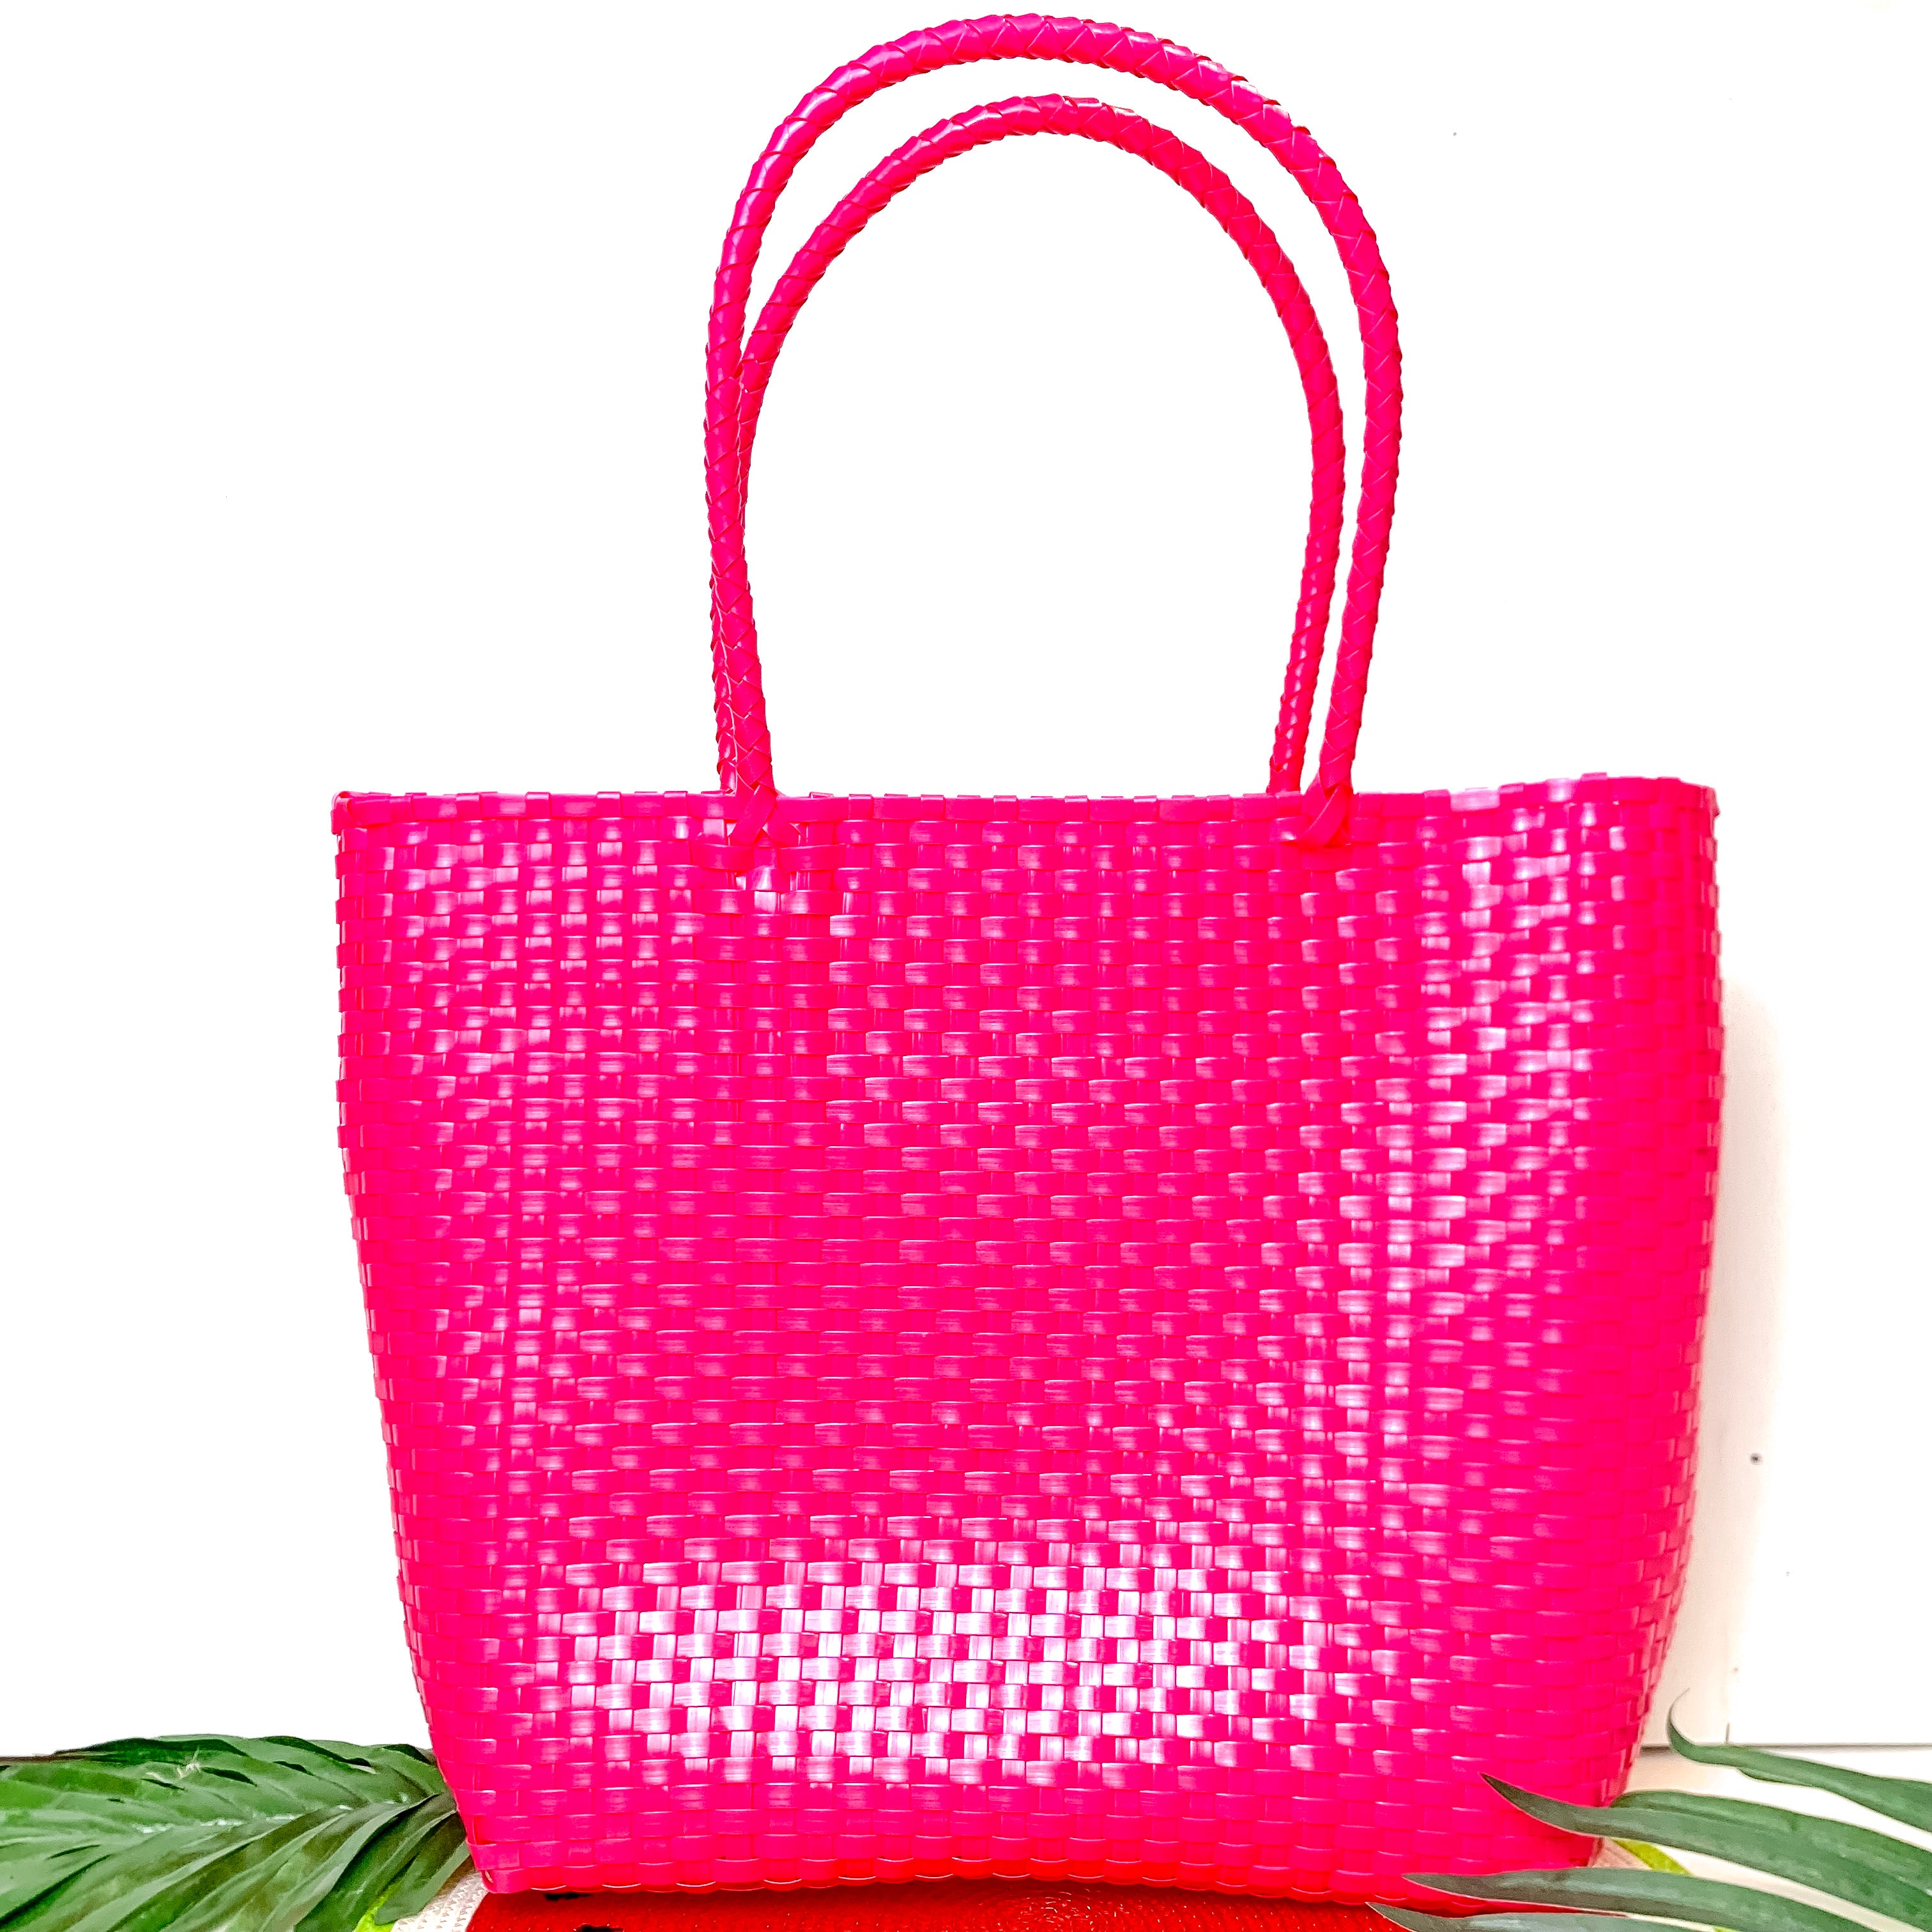 Coastal Couture Carryall Tote Bag in Neon Pink